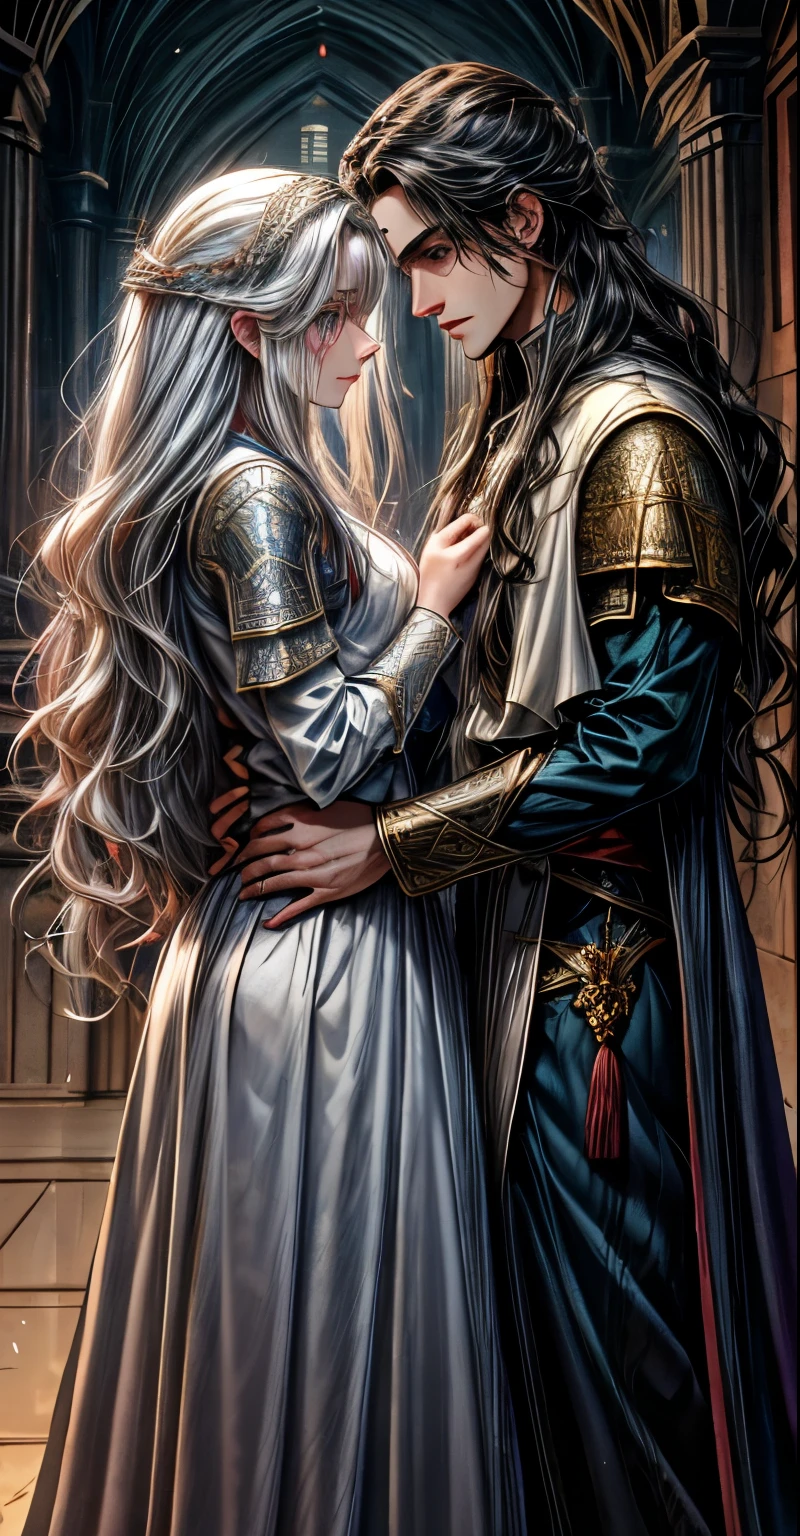 A picture ua couple together, a young man of apparent 17 years, has semi - long wavy black hair, his eyes are light blue, slightly tanned skin, his face is very similar to Jake Gyllenhaal, his clothes are those of a medieval Saracen warrior of black color, next to a young woman of apparent 18 years, her hair is long wavy grayish white, her eyes are violet, and her skin is pale, similar in face to Ana de Arma, slender with clothes of a Medieval Saracen Princess, with red clothes, both and in the background a citadel, illuminated by the lights of the same in a starry night scene